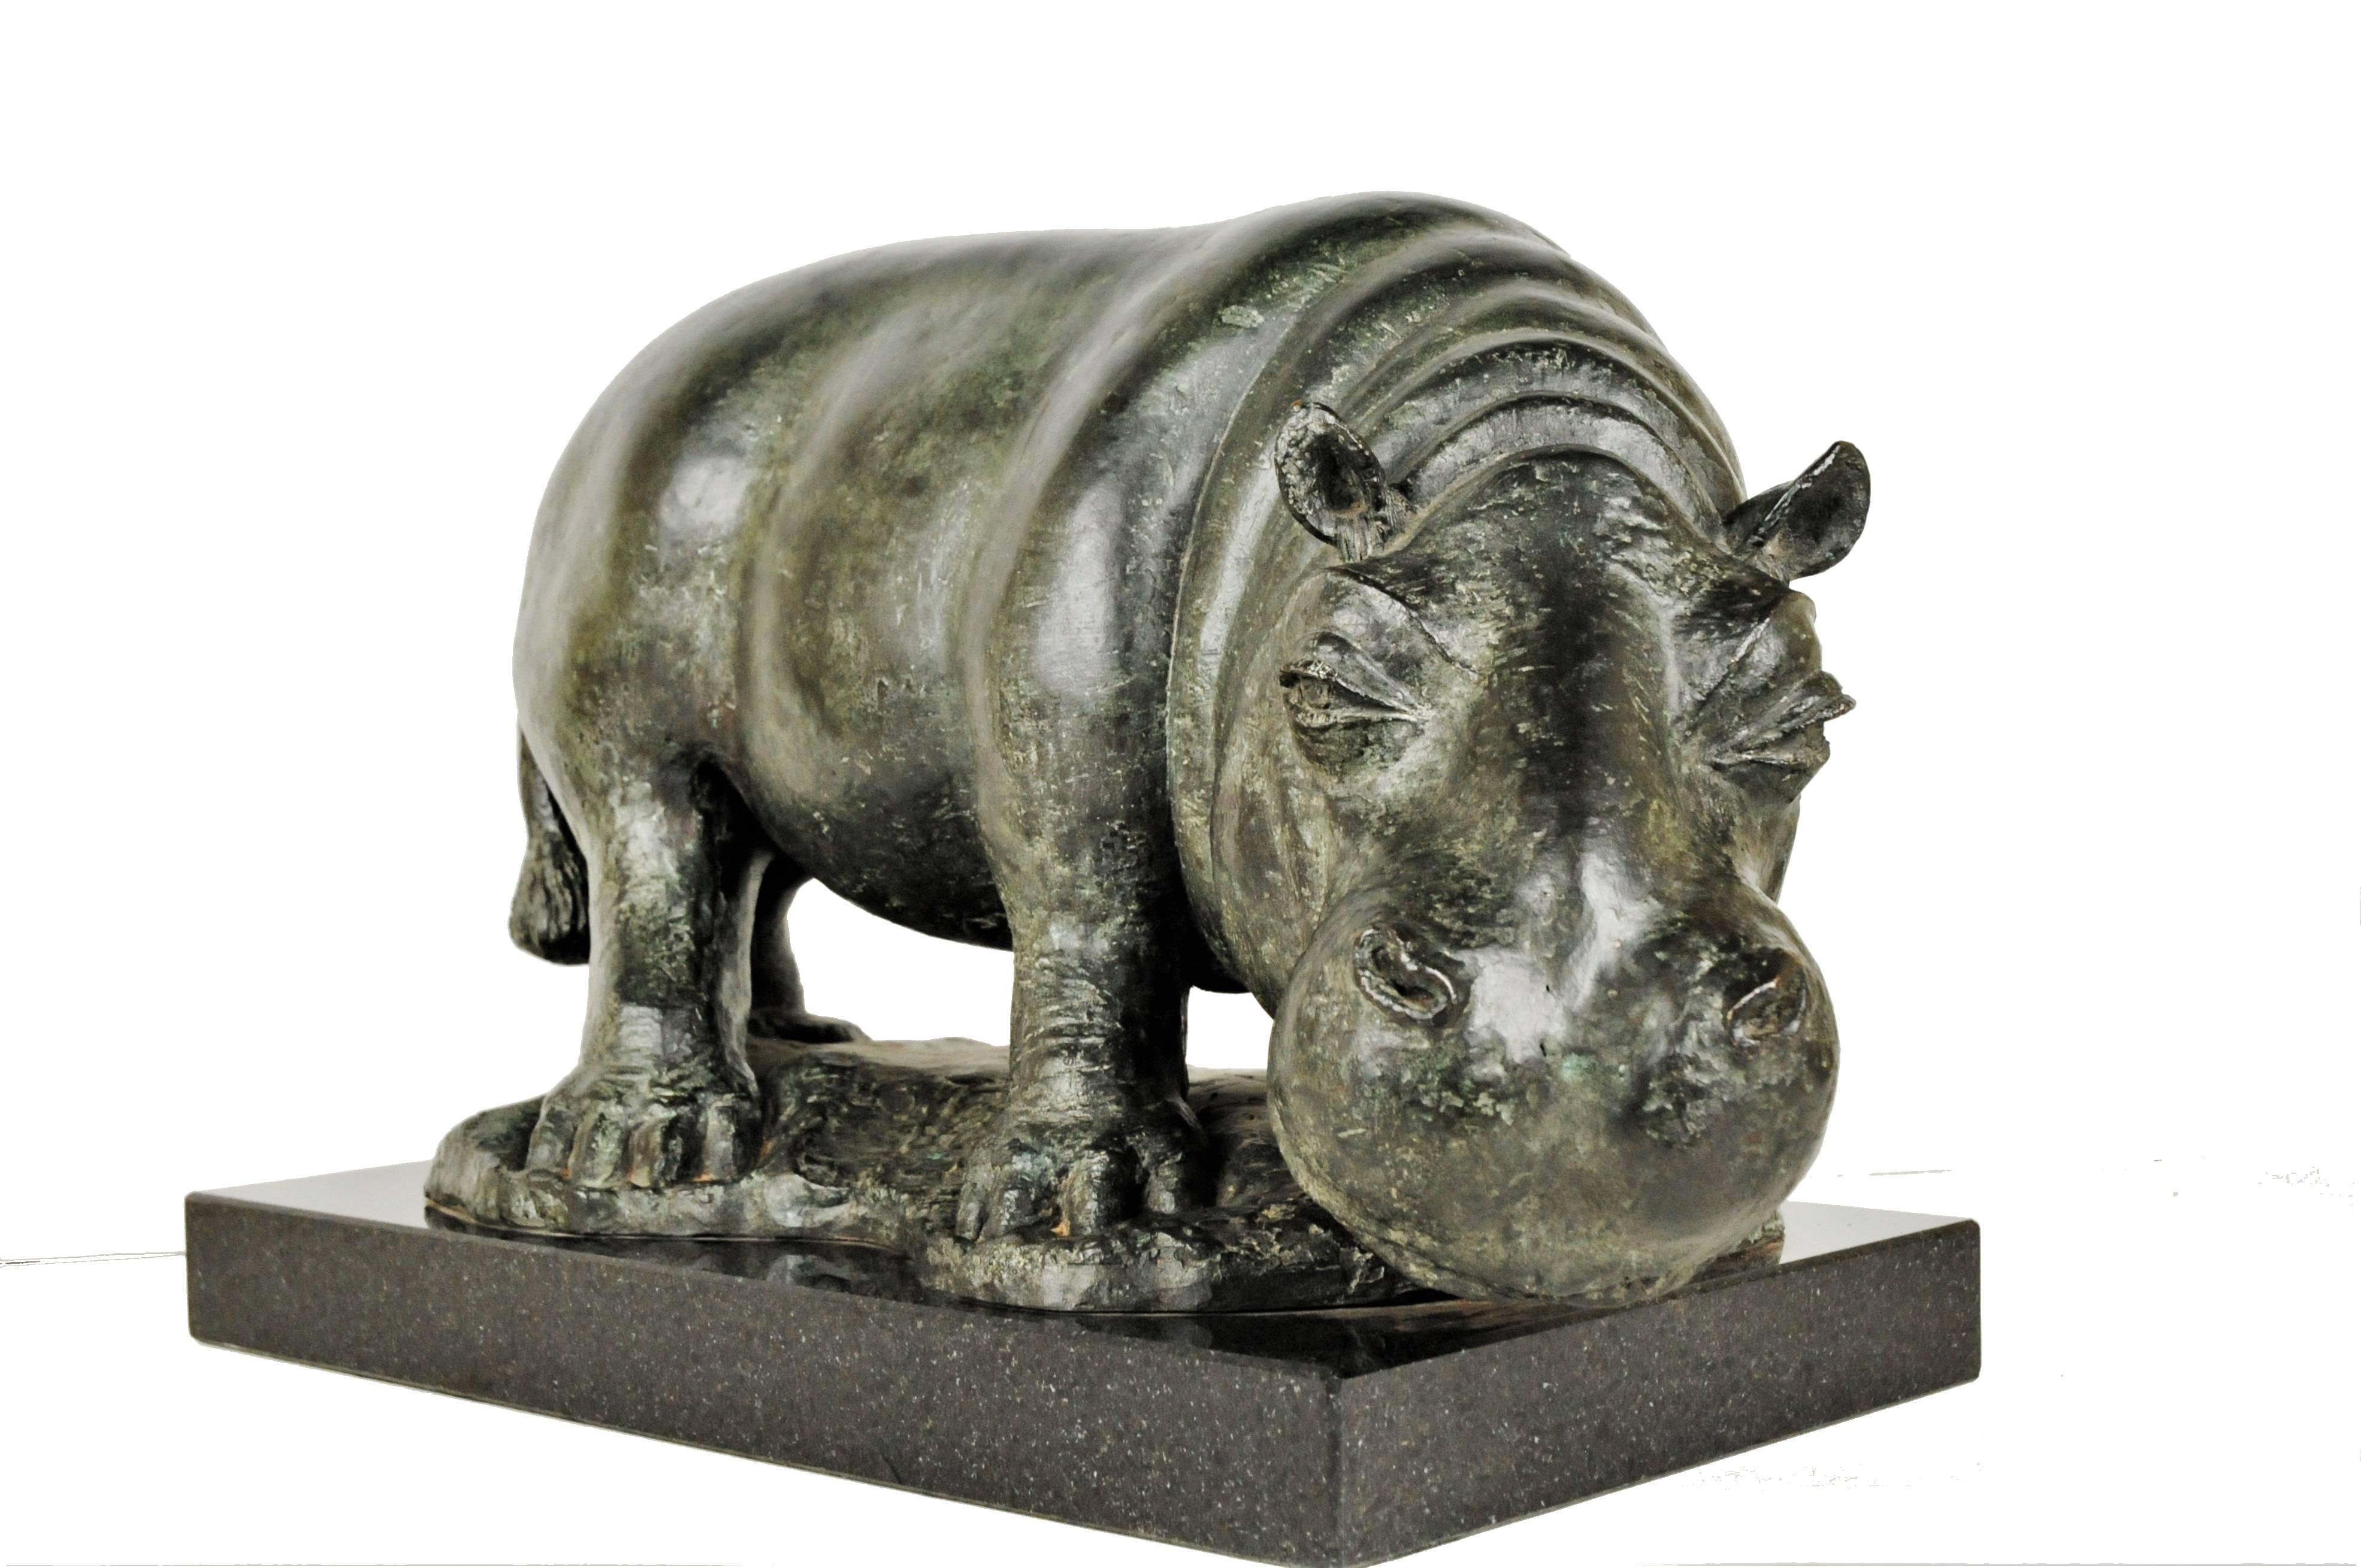 Sculpted in 1983, Hippo Madre patinated bronze sculpture on black granite base is from a limited edition of five. 

Charles Umlauf (1911 - 1994) was an American sculptor and teacher who was born in South Haven, Michigan. His sculptures can be found